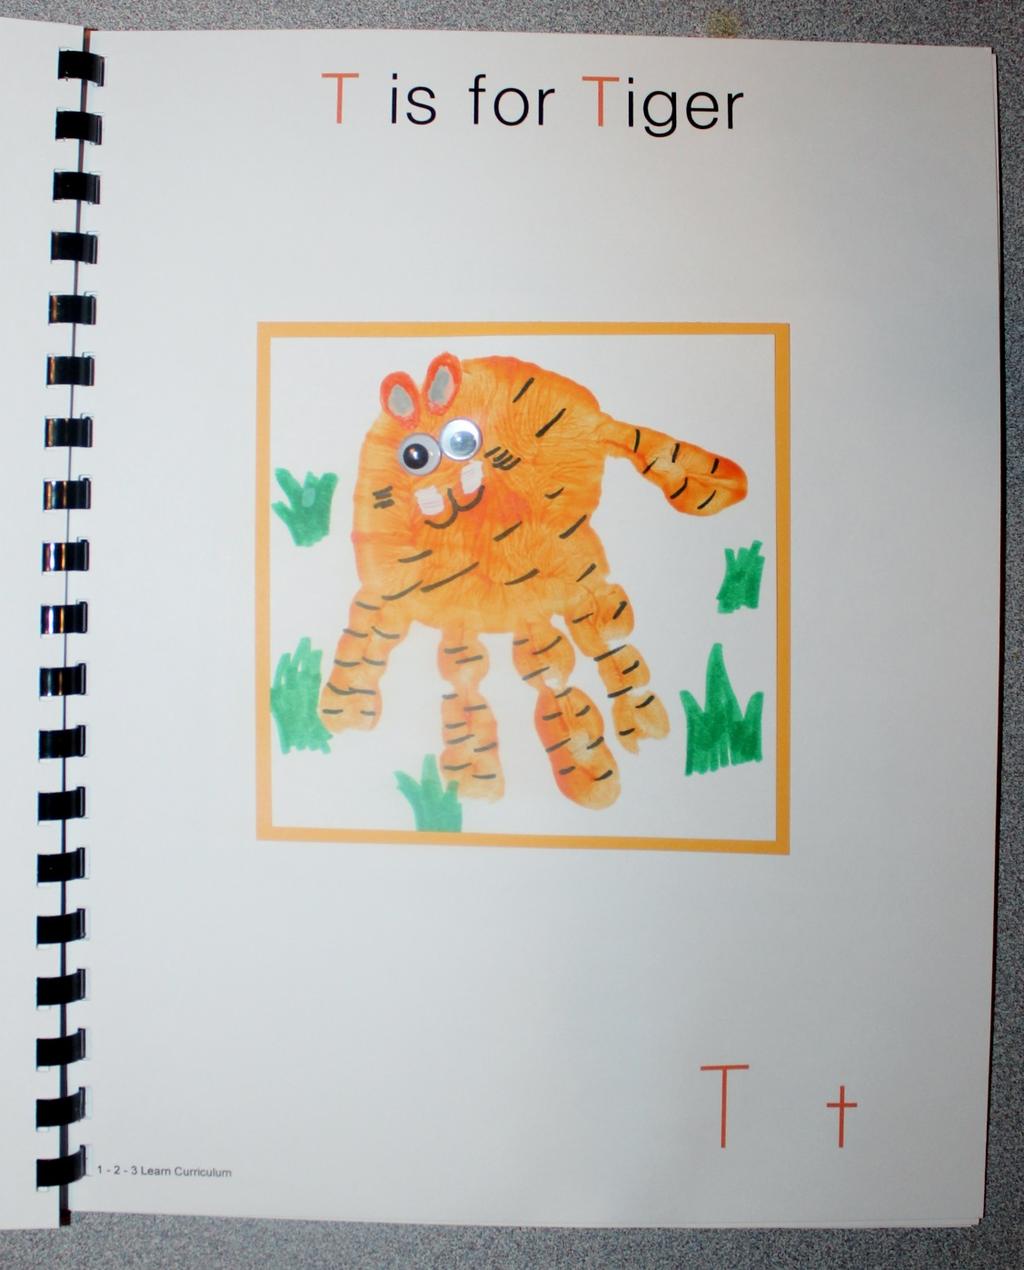 T is for Tiger Paint the child s hand orange and place on white card stock. When dry, trim and attach to orange card stock. Using orange paint, make ears.